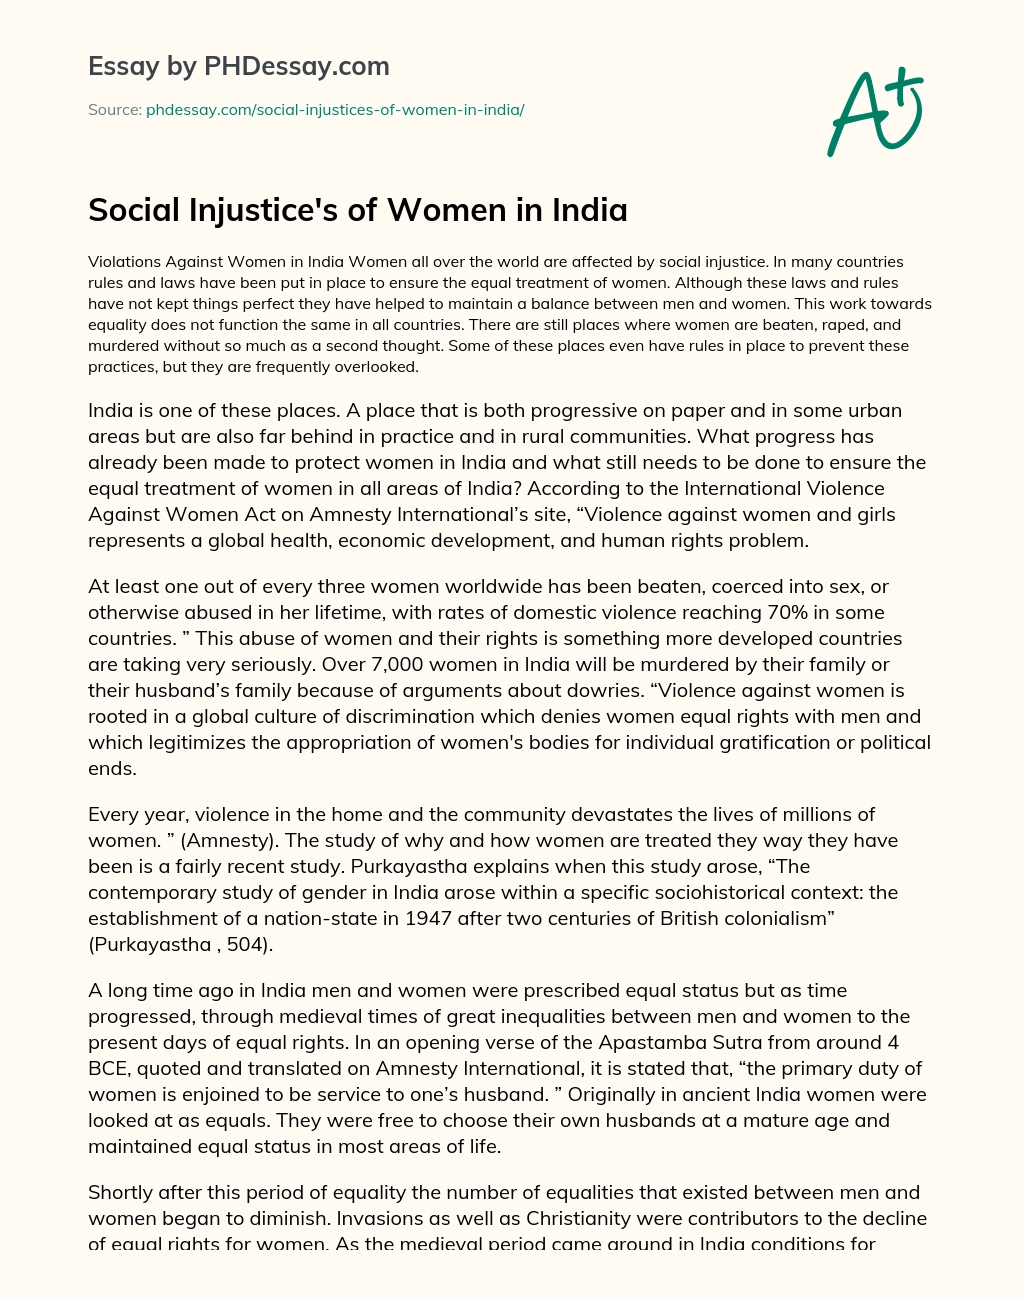 Social Injustice’s of Women in India essay